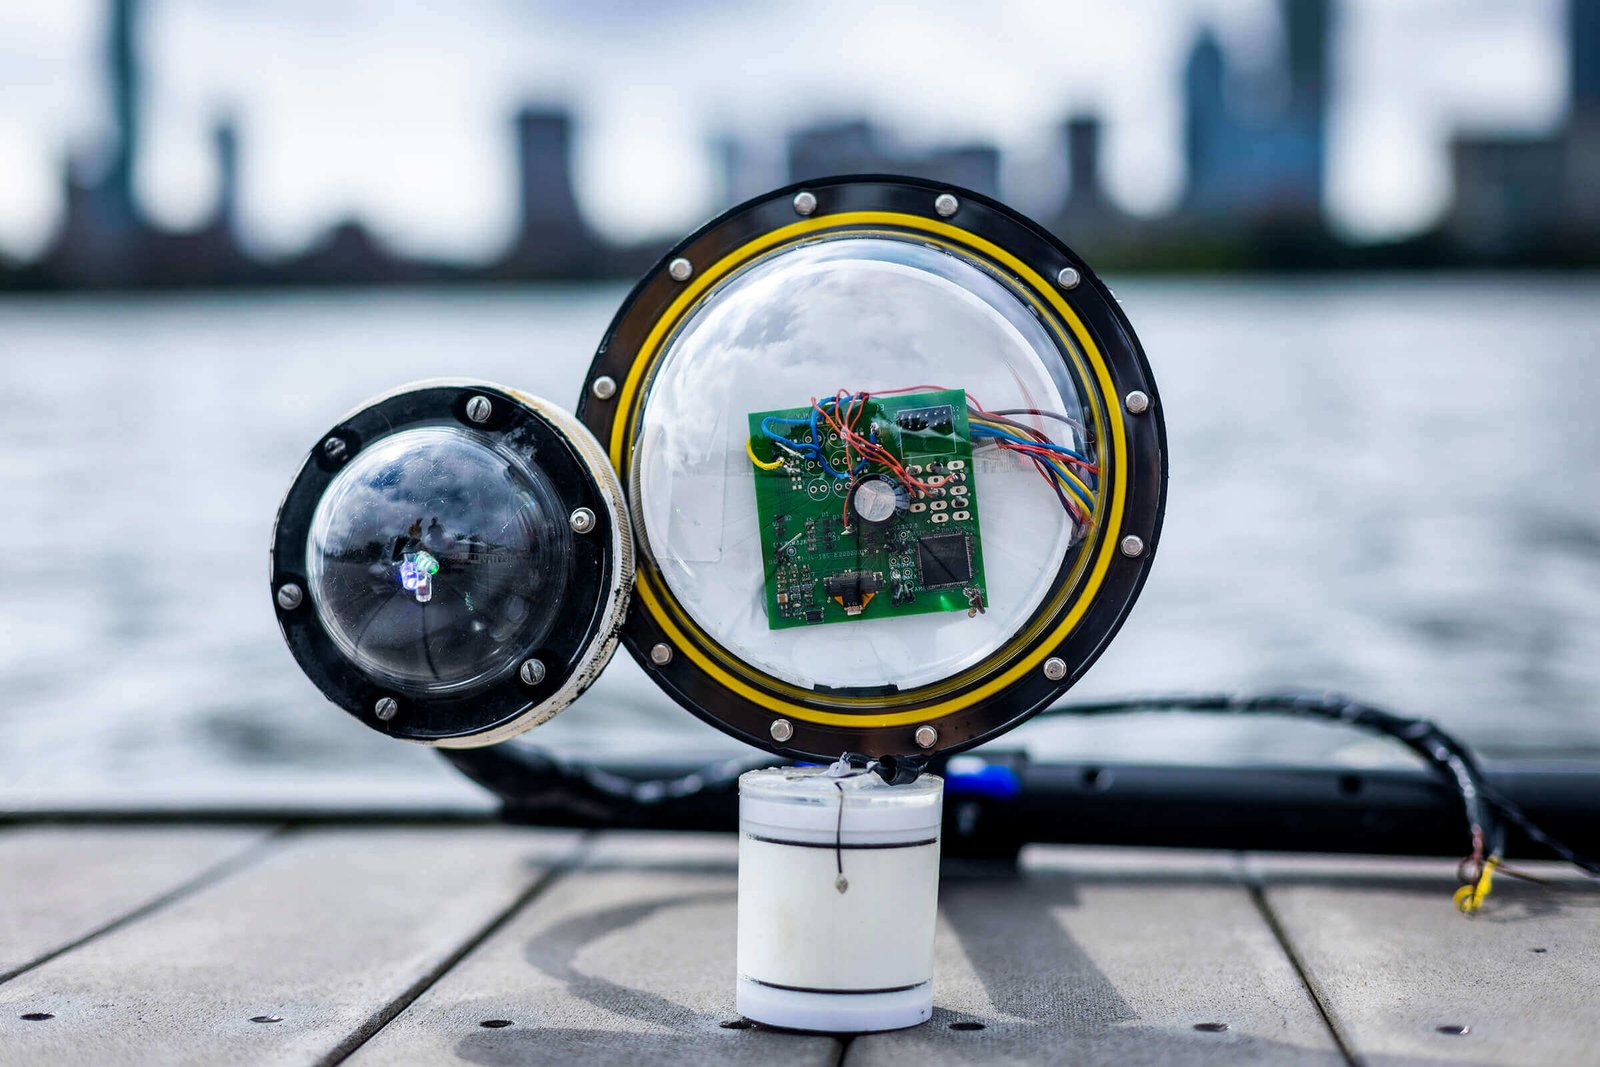 They build a wireless and battery-free underwater camera that works with sound